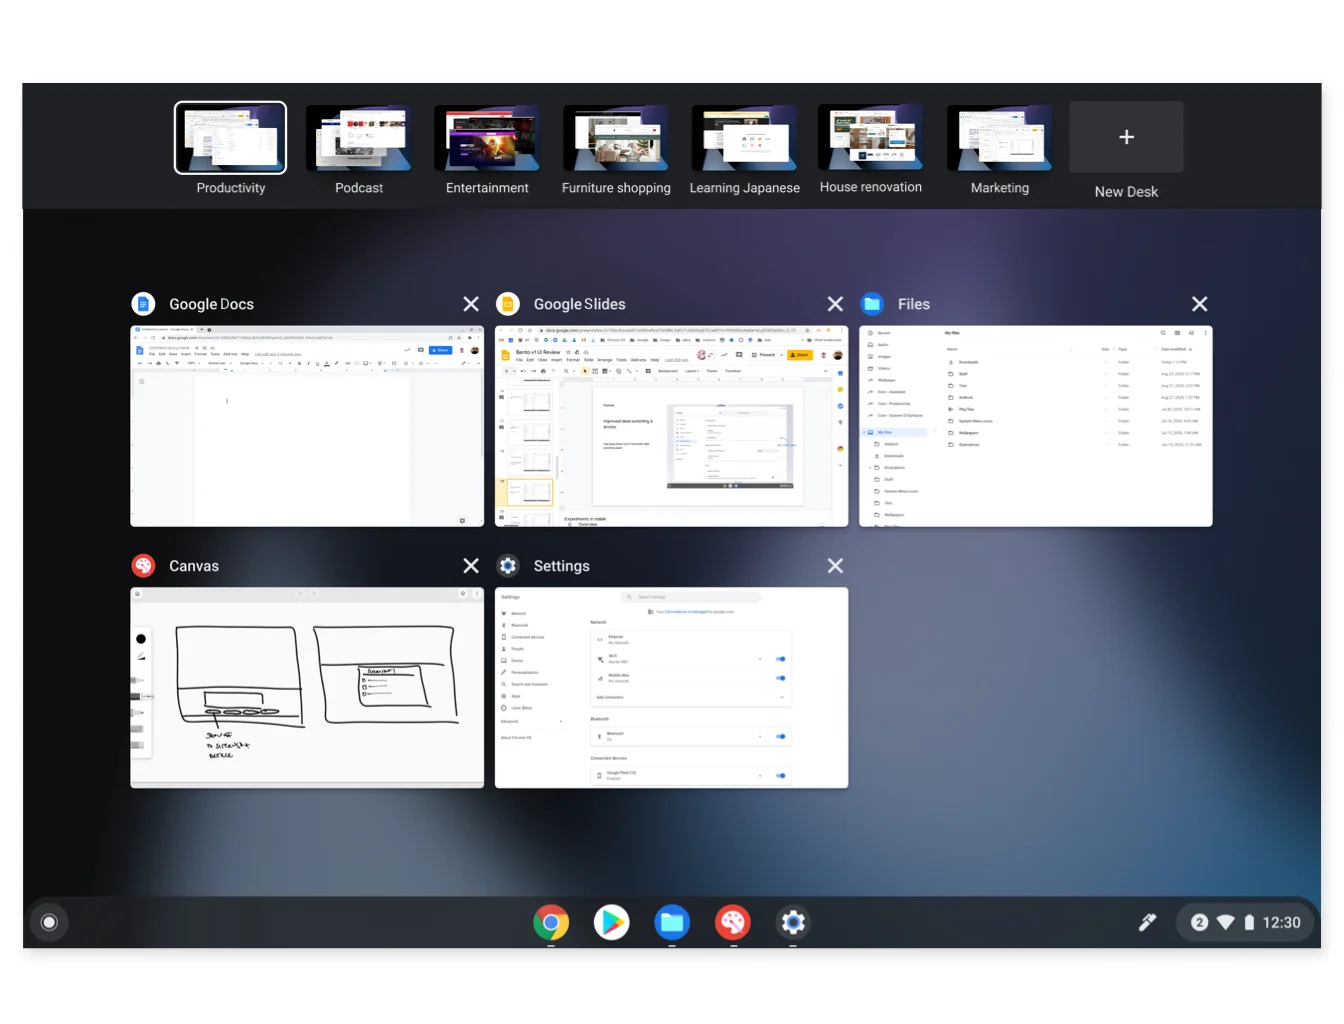 Chrome OS 10th birthday update images support for up to eight Desks and a new overview mode